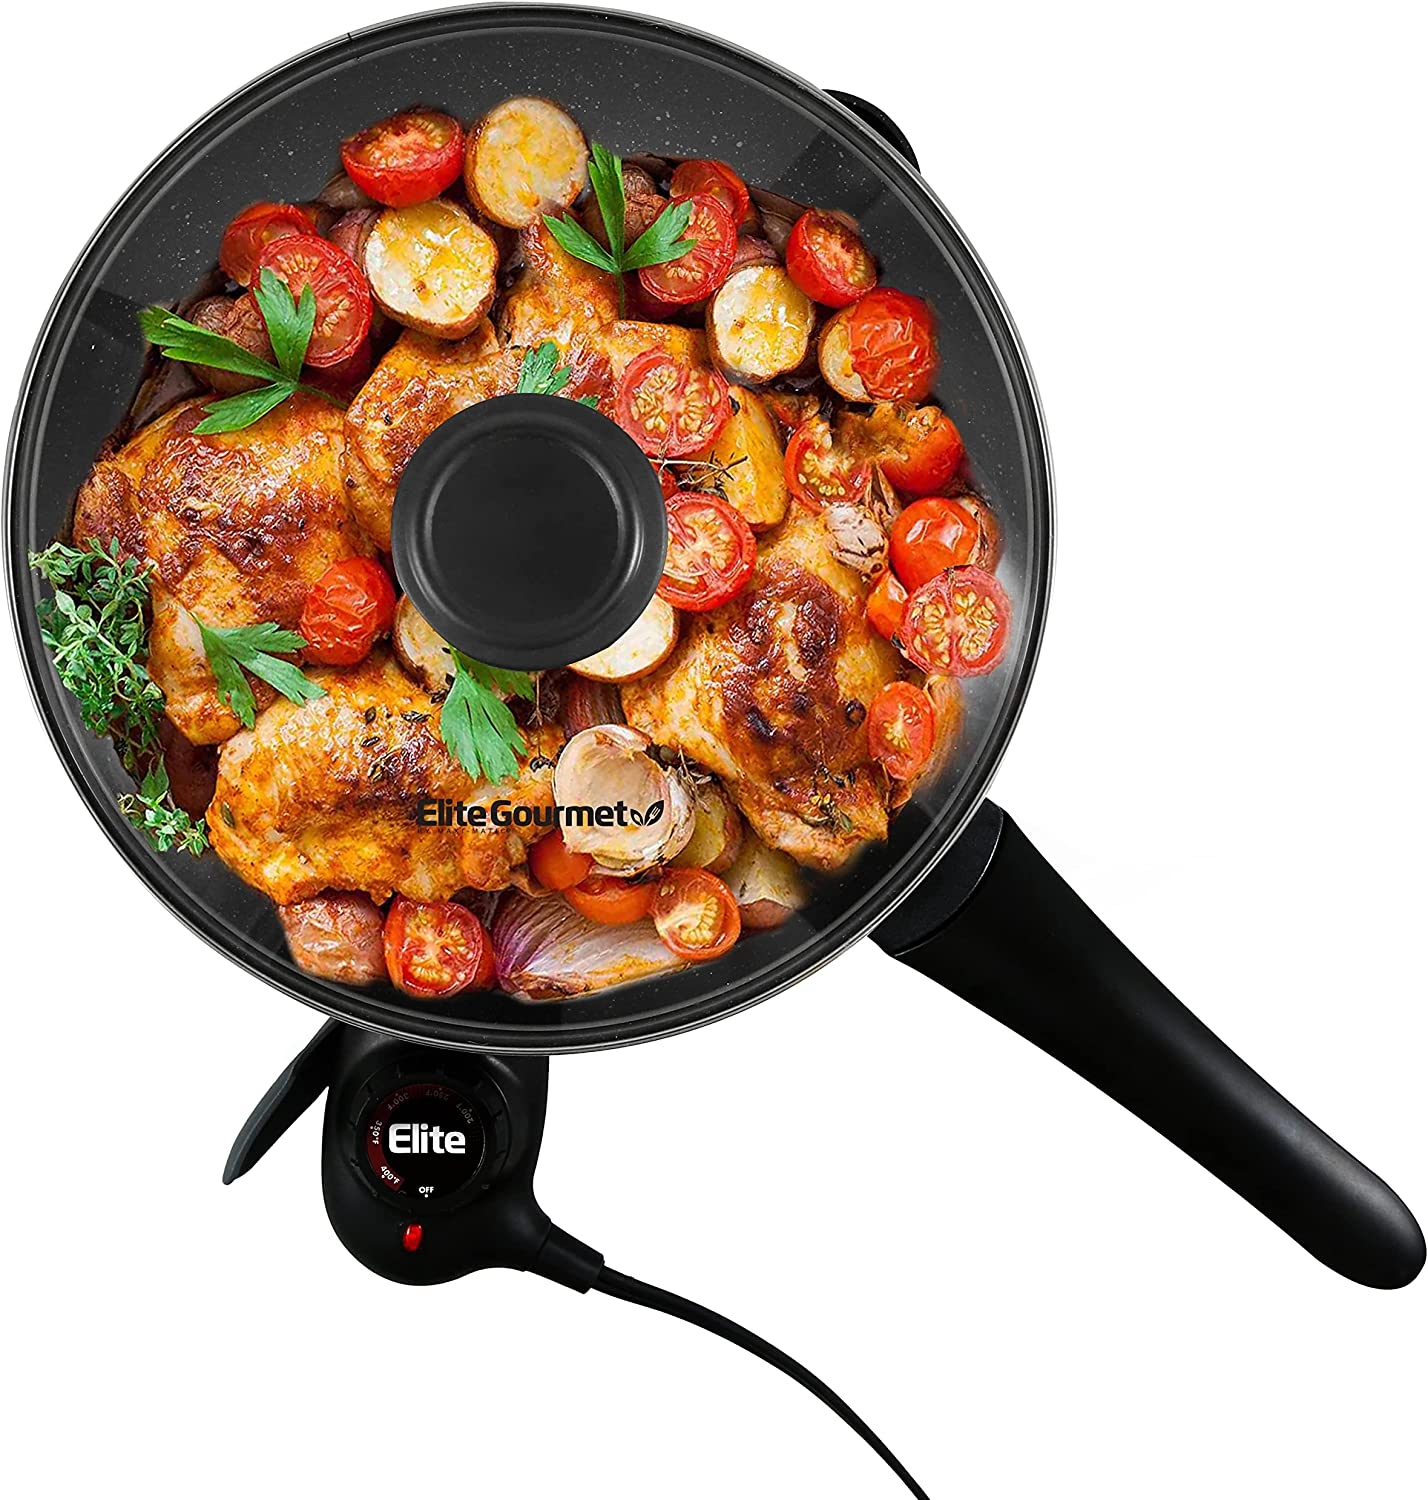 Elite Gourmet EGL-6101 Personal Stir Fry Griddle Pan, Rapid Heat Up, 650 Watts Non-stick Electric Skillet with Tempered Glass